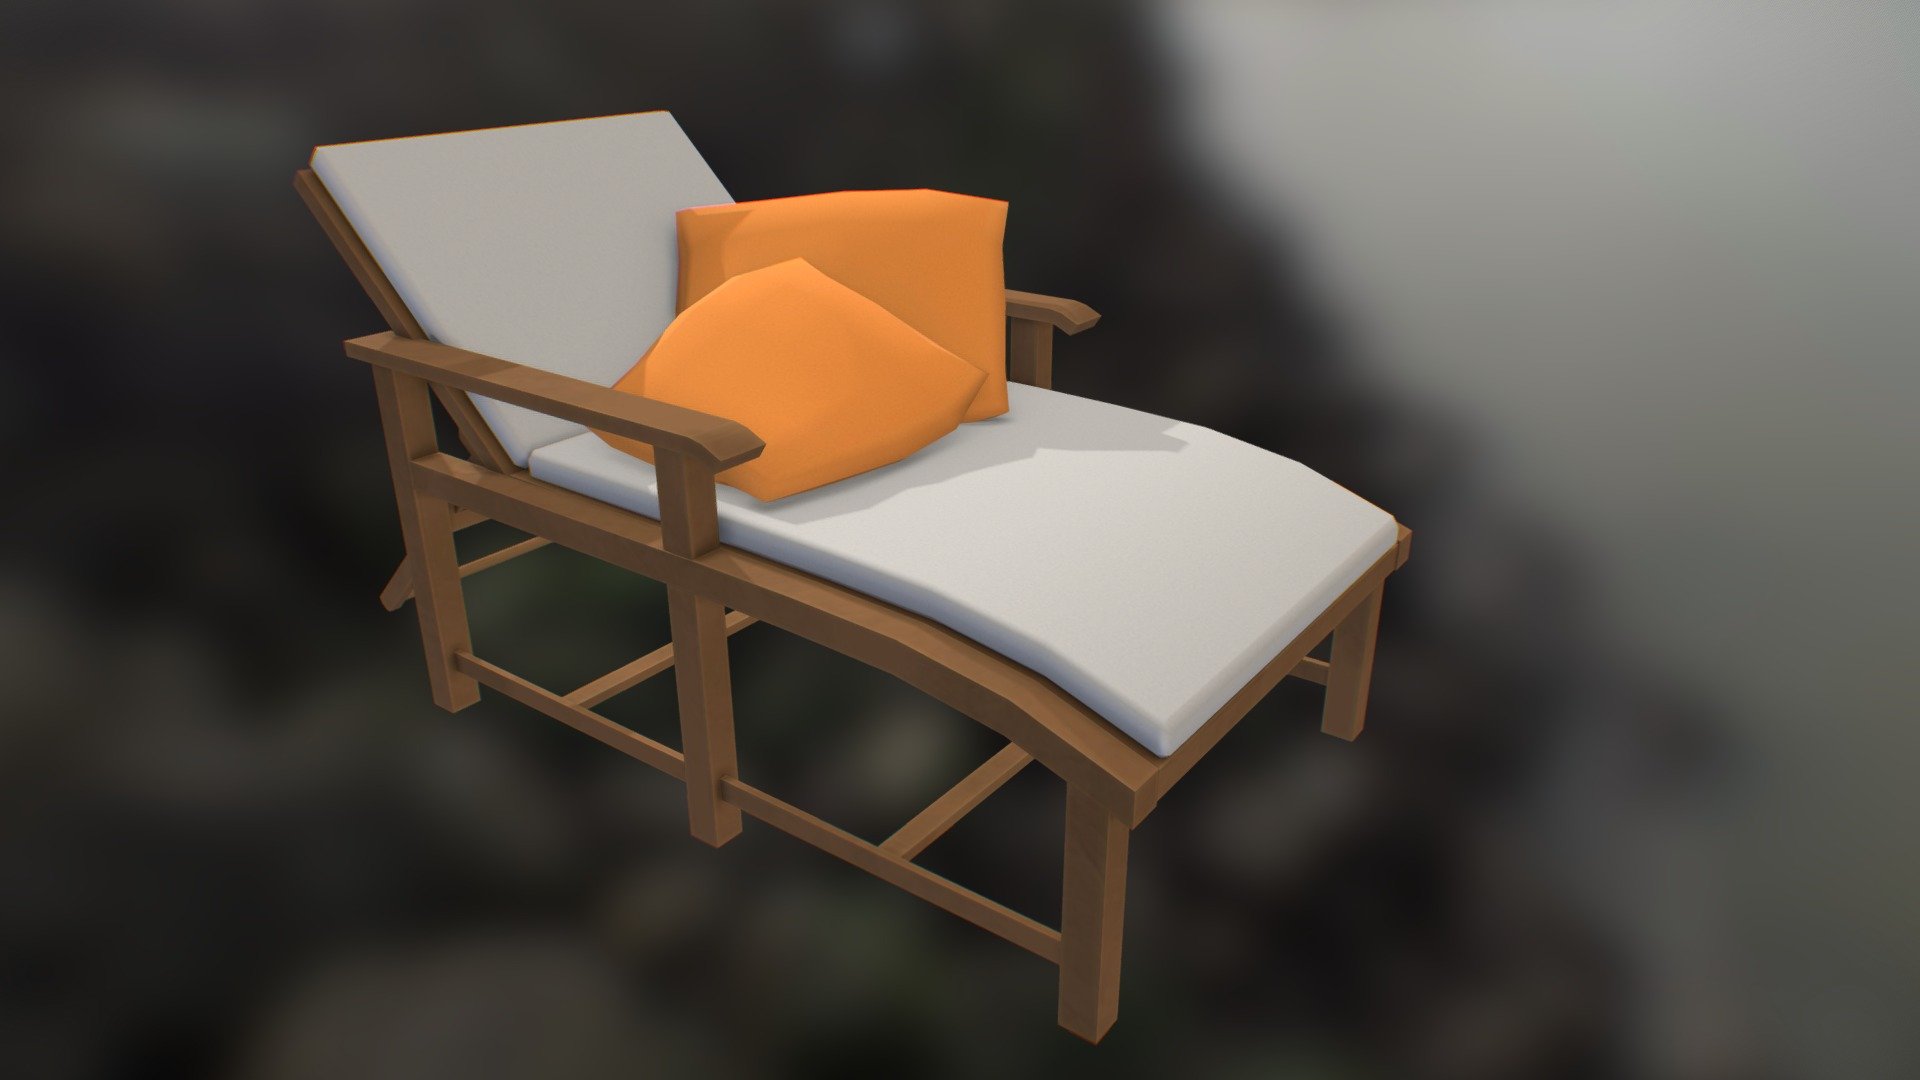 Low Poly Beach Chair for your renders and games

Textures:

Diffuse color

All textures are 2K

Files Formats:

Blend

Fbx

Obj - Low Poly Beach Chair - Buy Royalty Free 3D model by Vanessa Araújo (@vanessa3d) 3d model